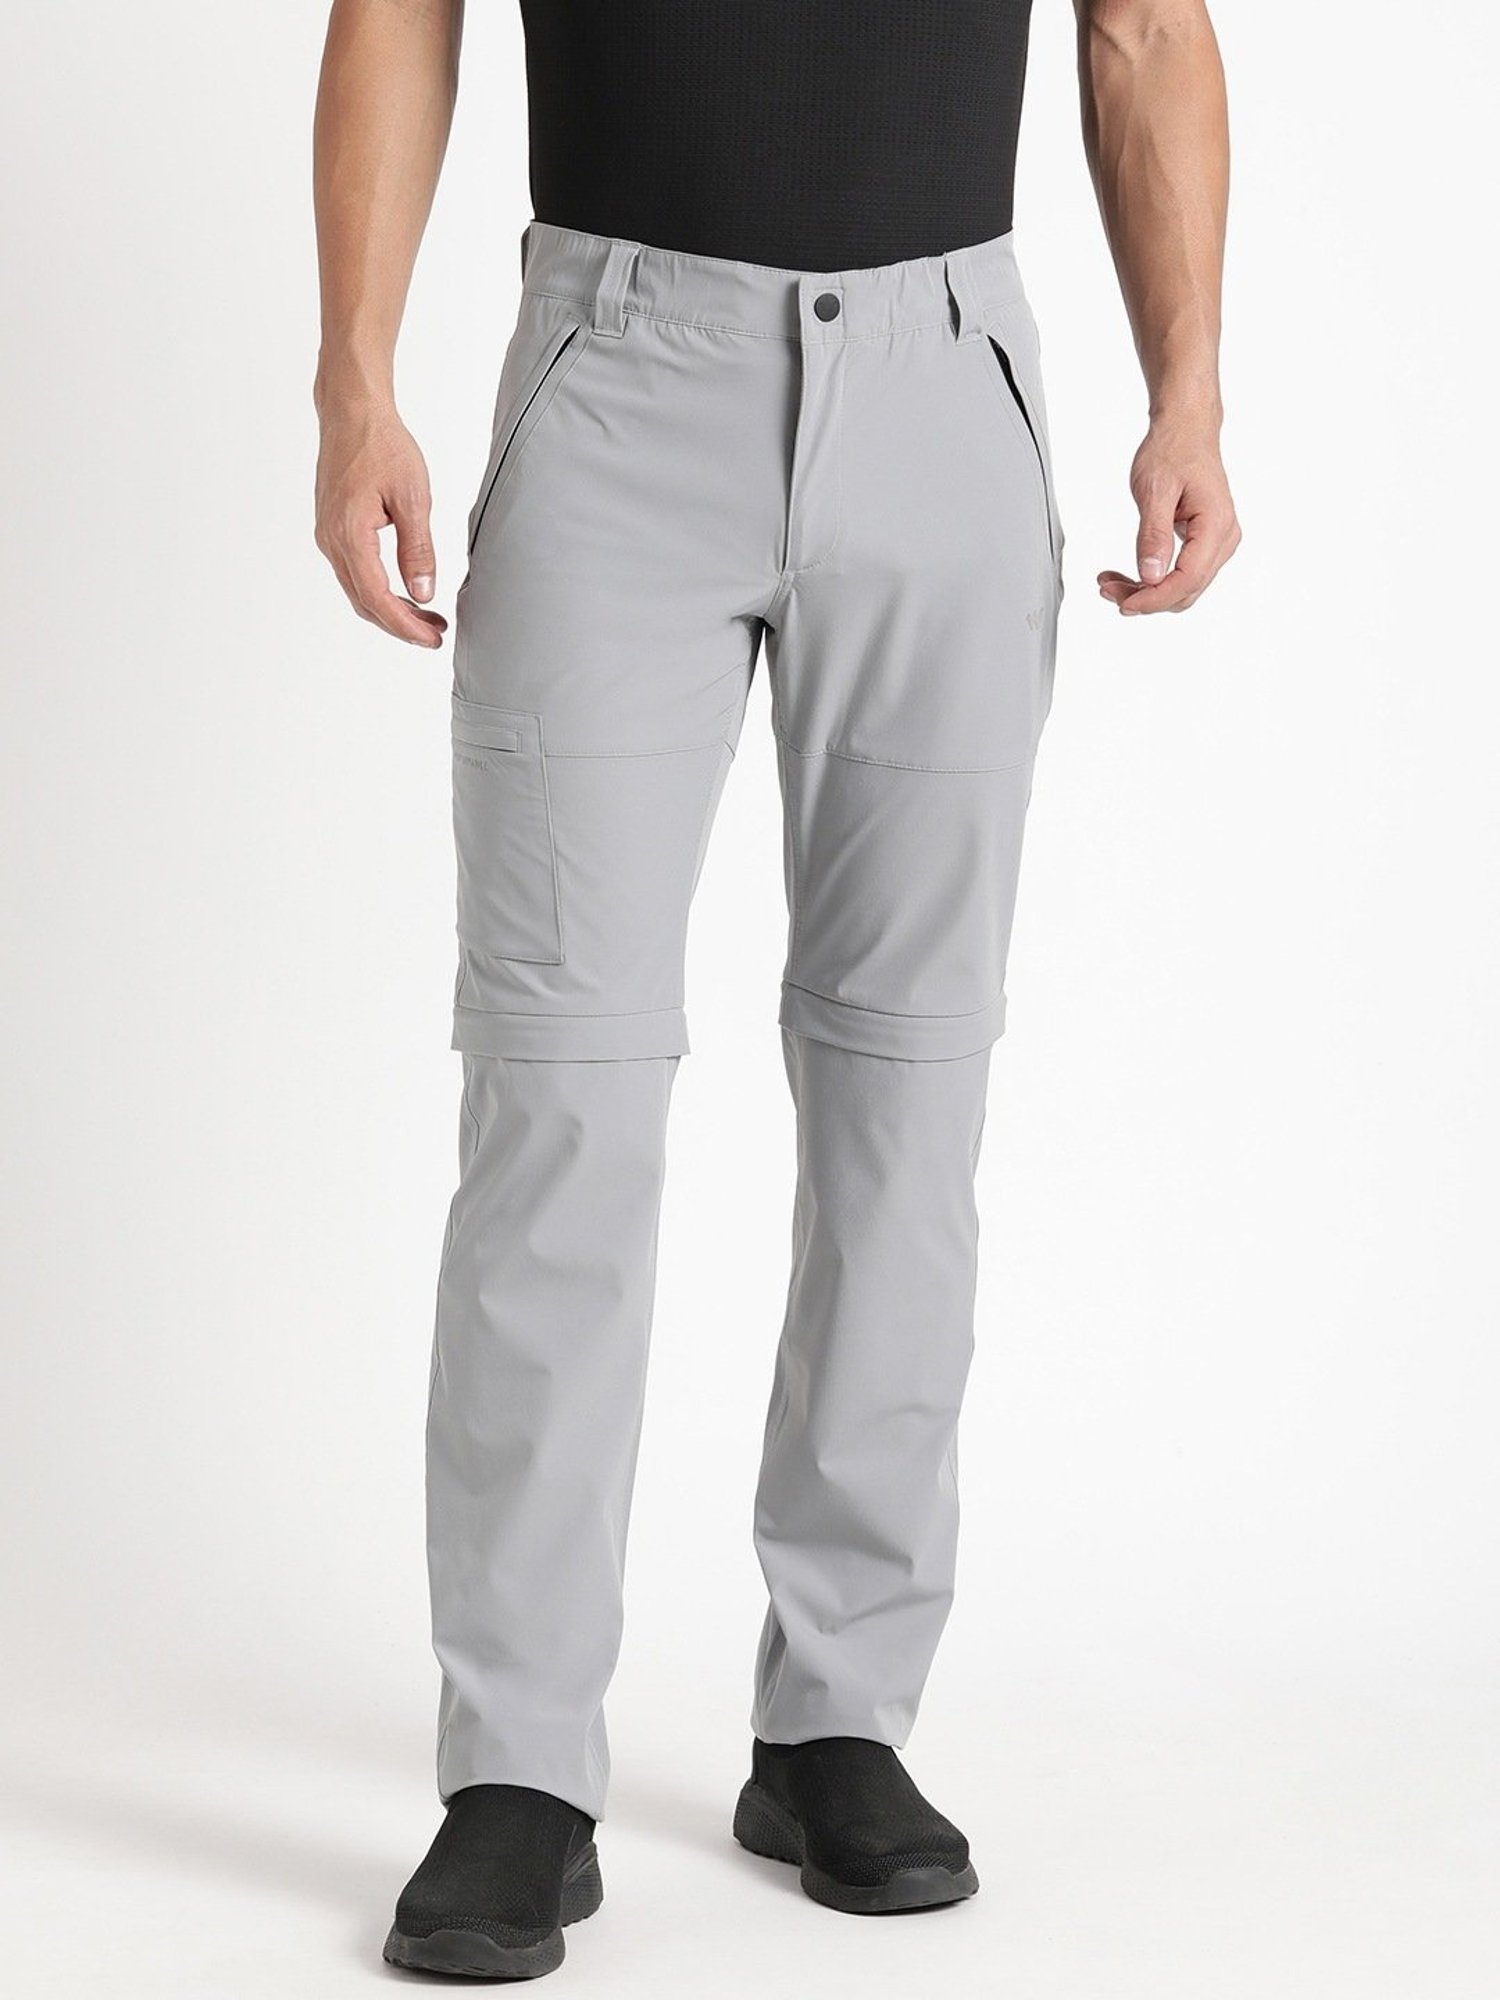 Wildcraft Trousers - Buy Wildcraft Trousers online in India